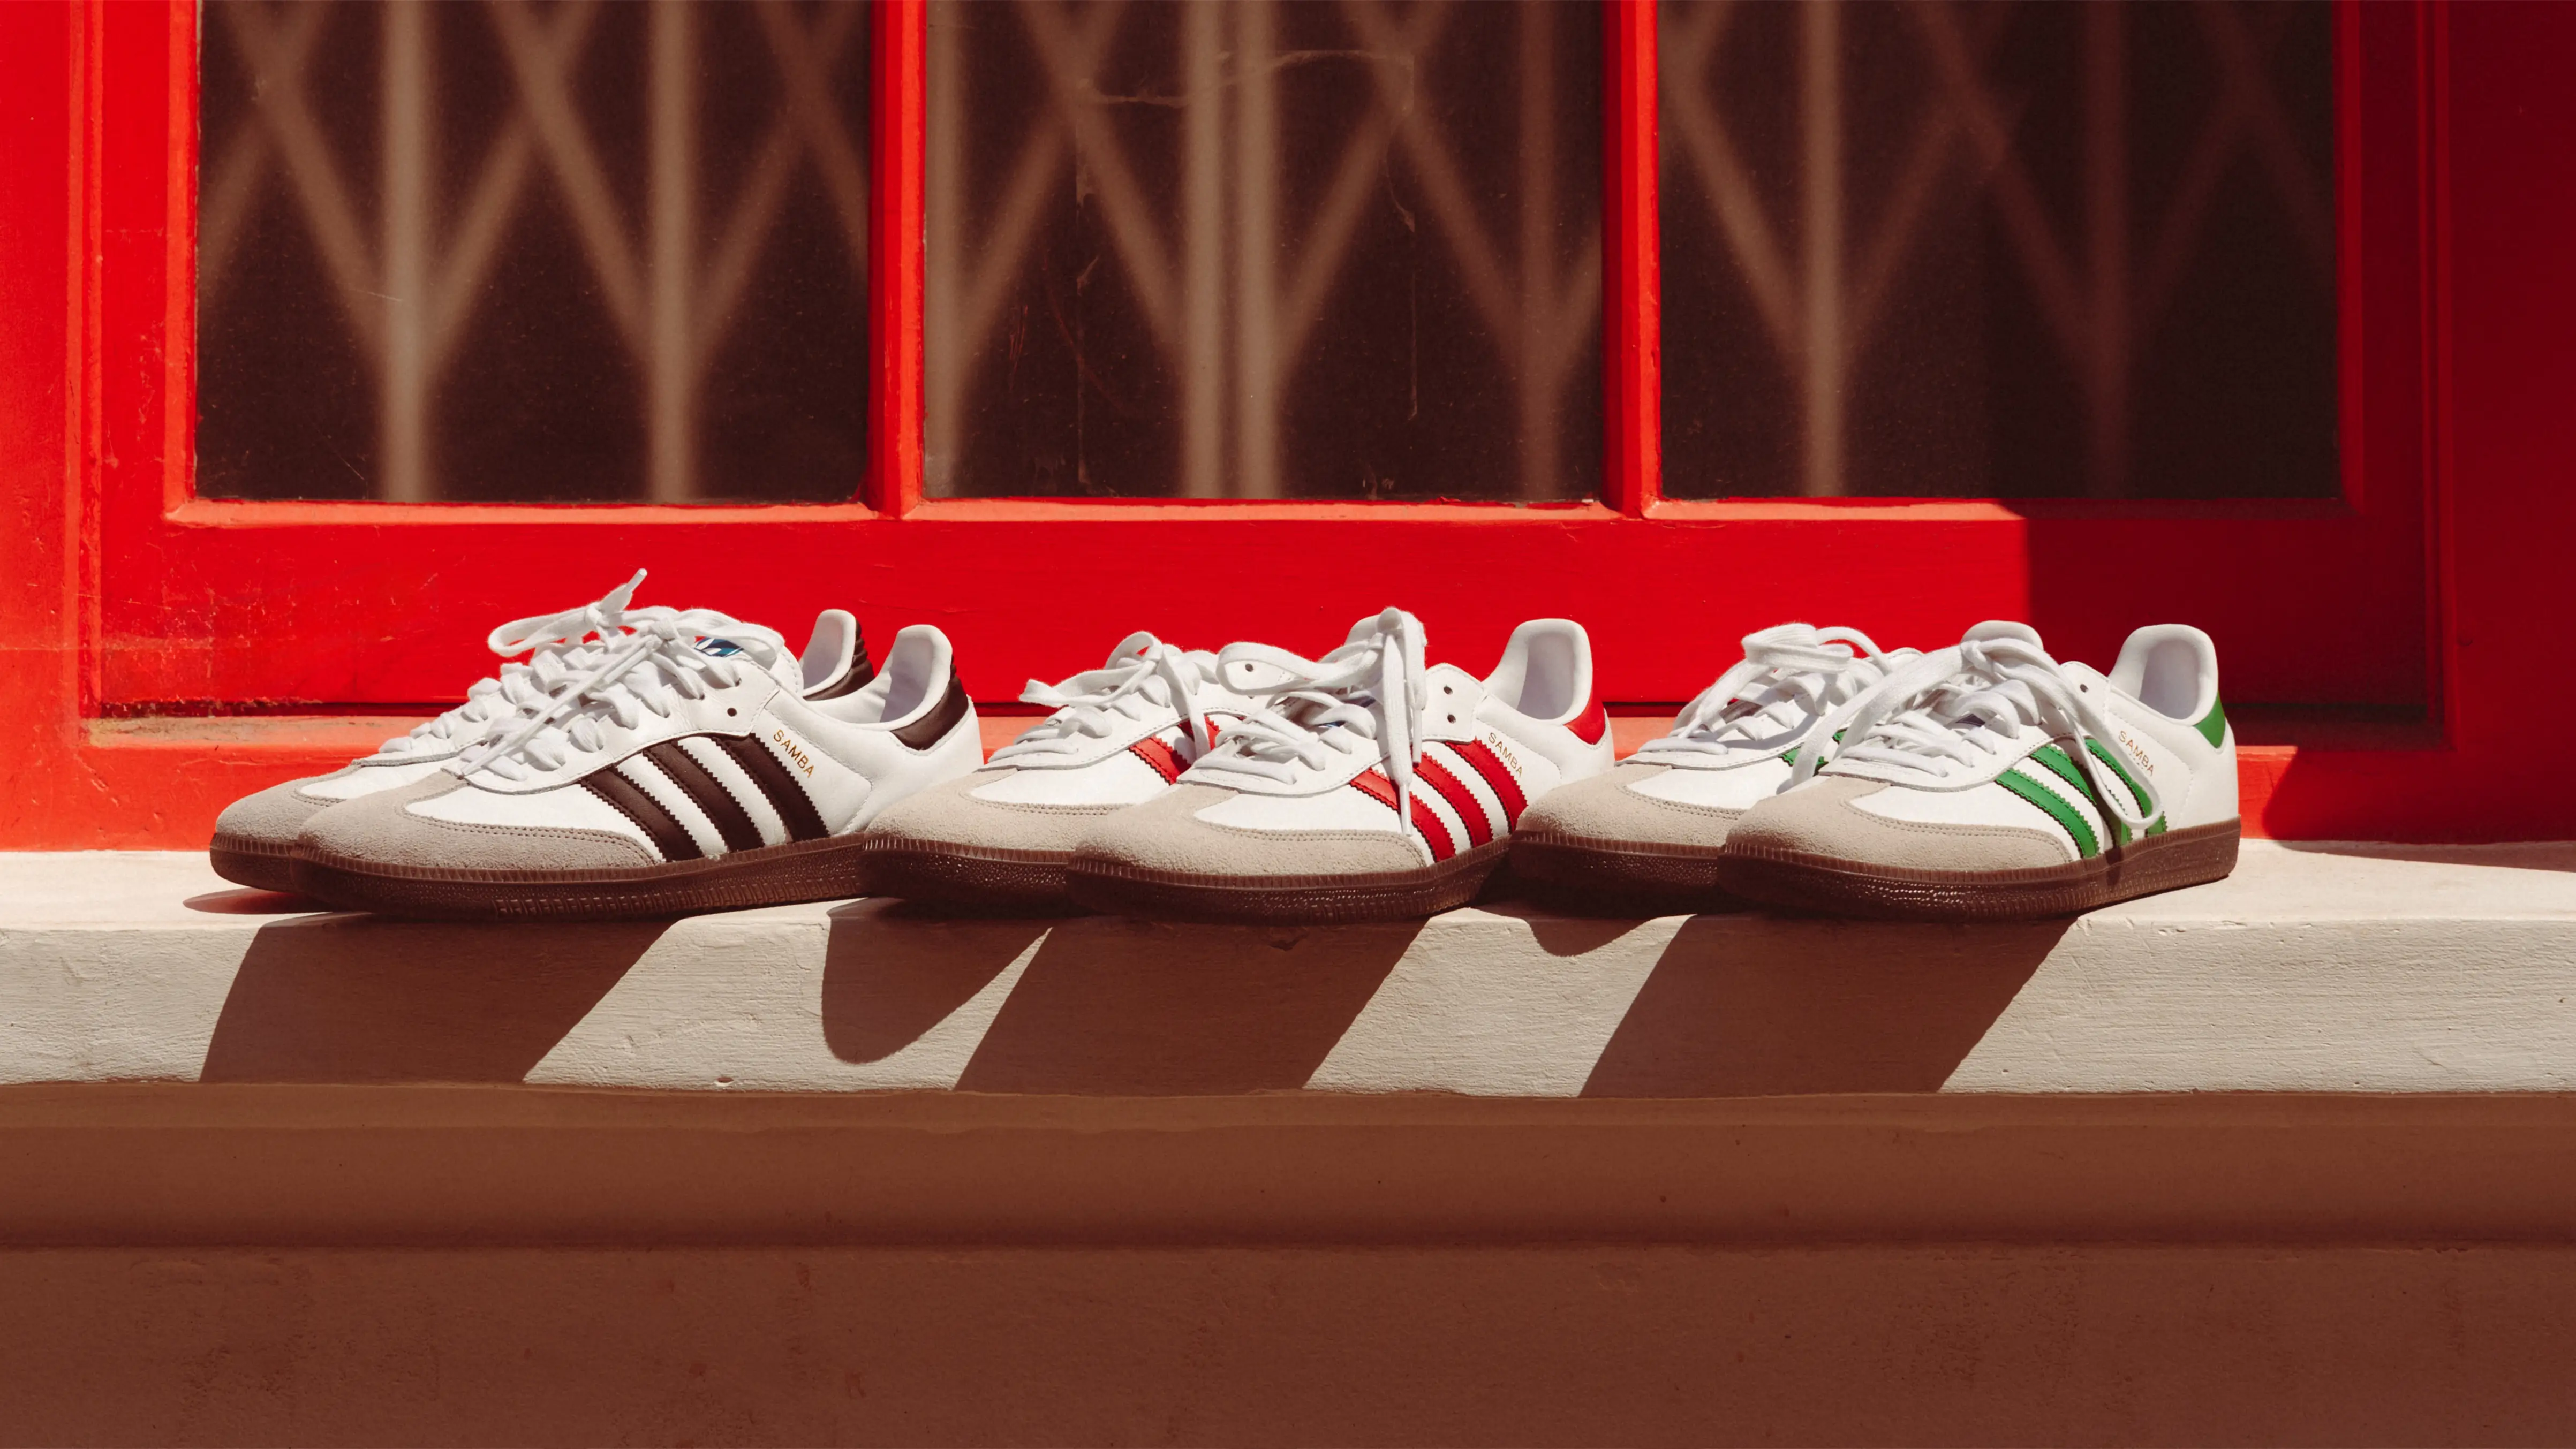 adidas Samba Sizing: How Do They Fit? | new adidas pure boost